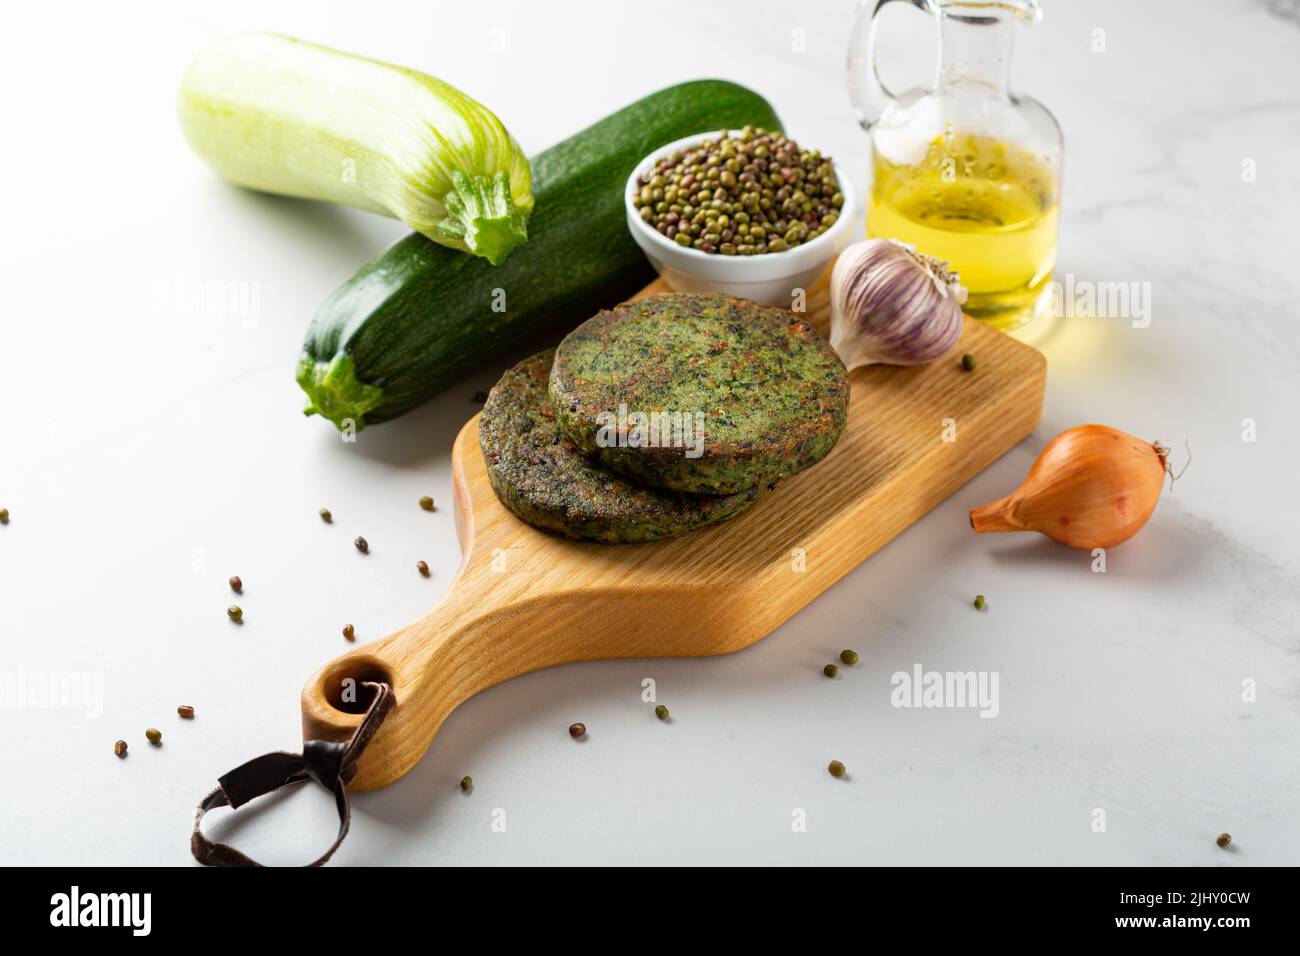 Vegan fritters made of beans and zucchini food Stock Photo